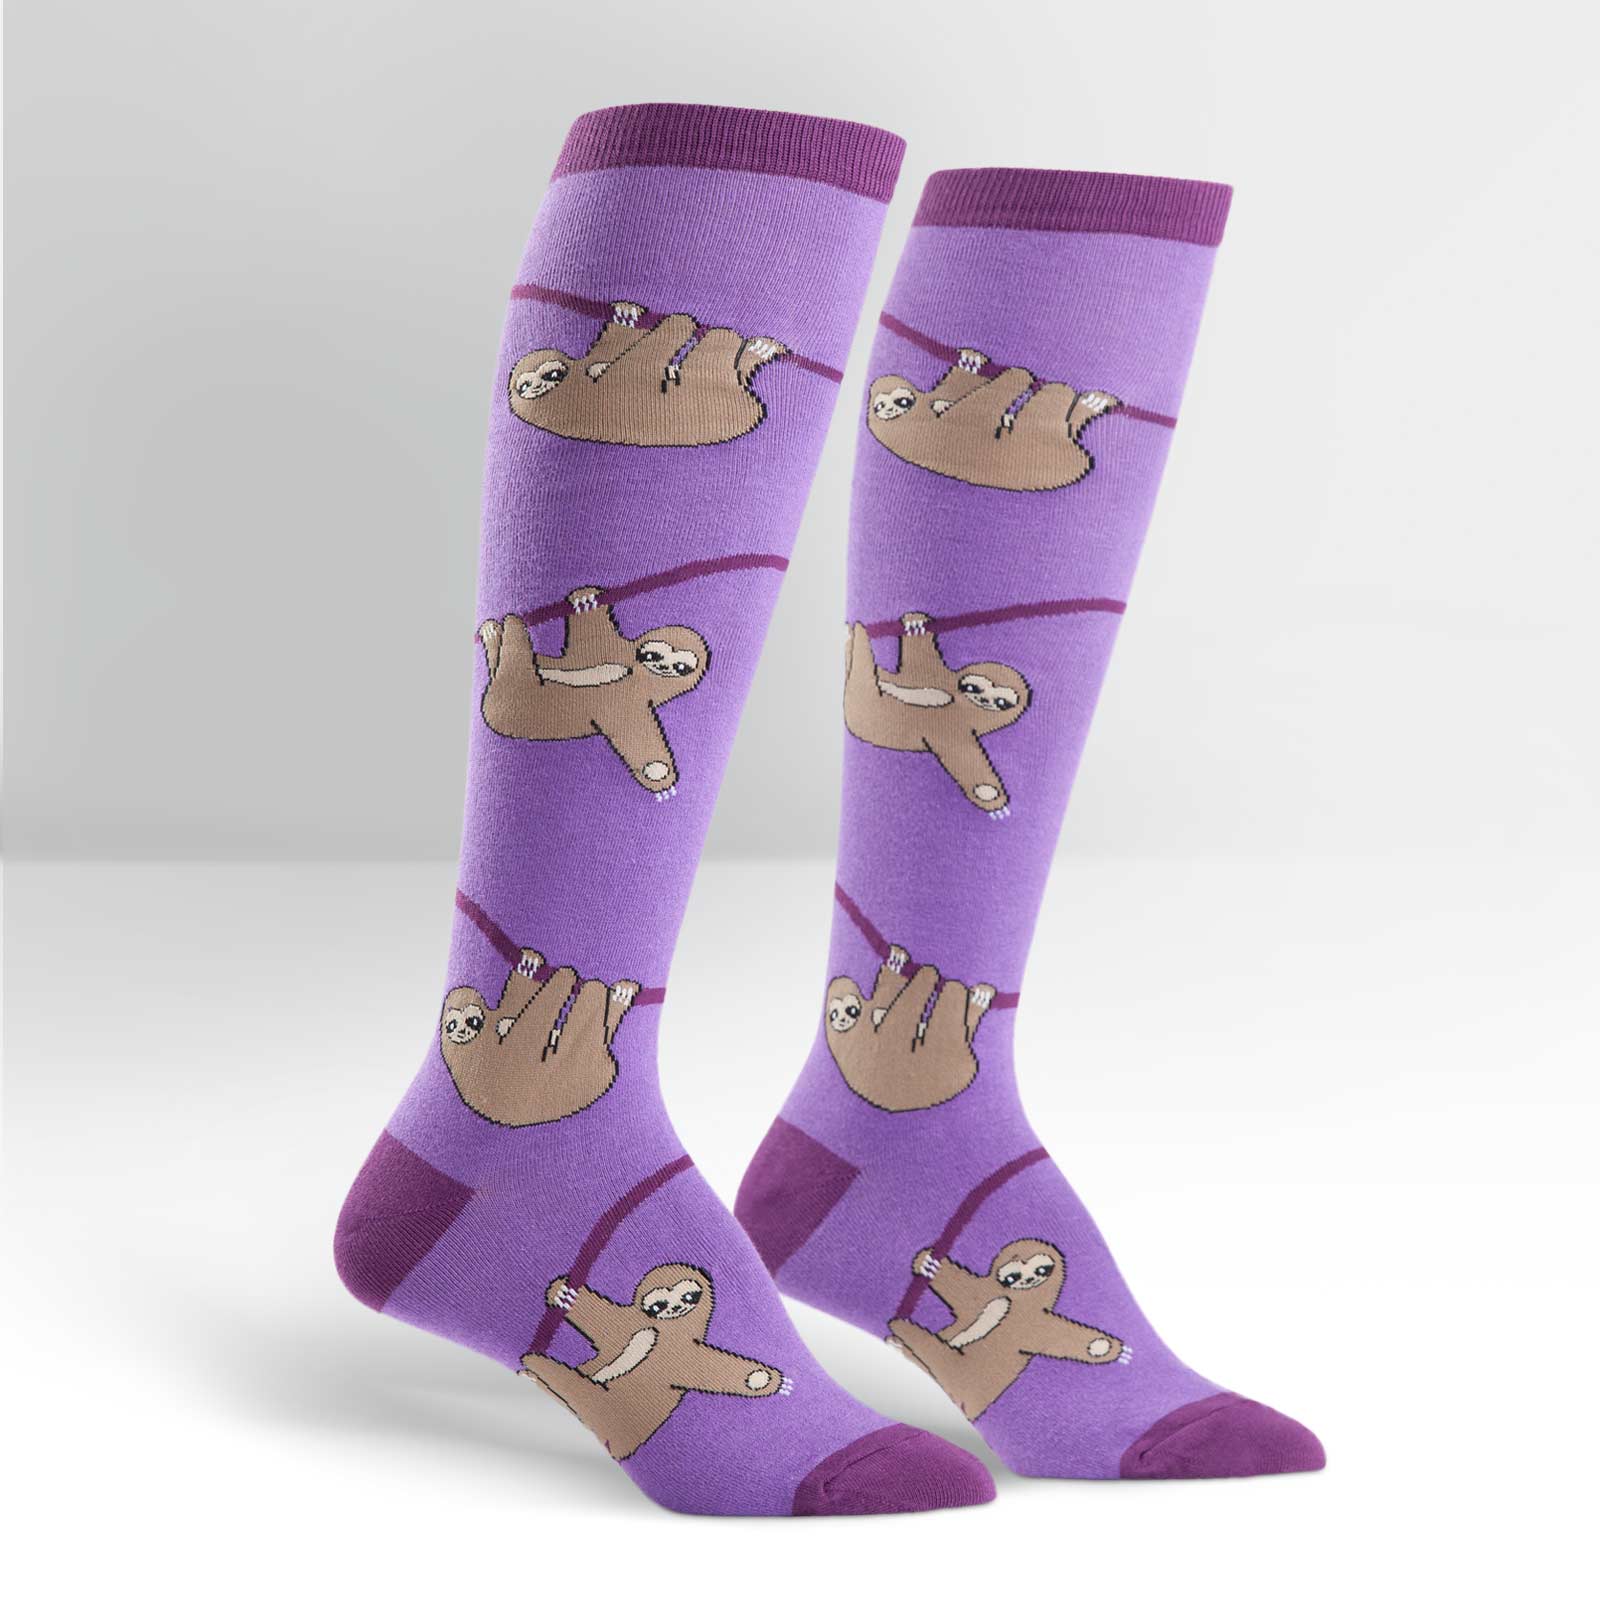 Purple knee high socks with brown sloths hanging from purple branches - The Sockery